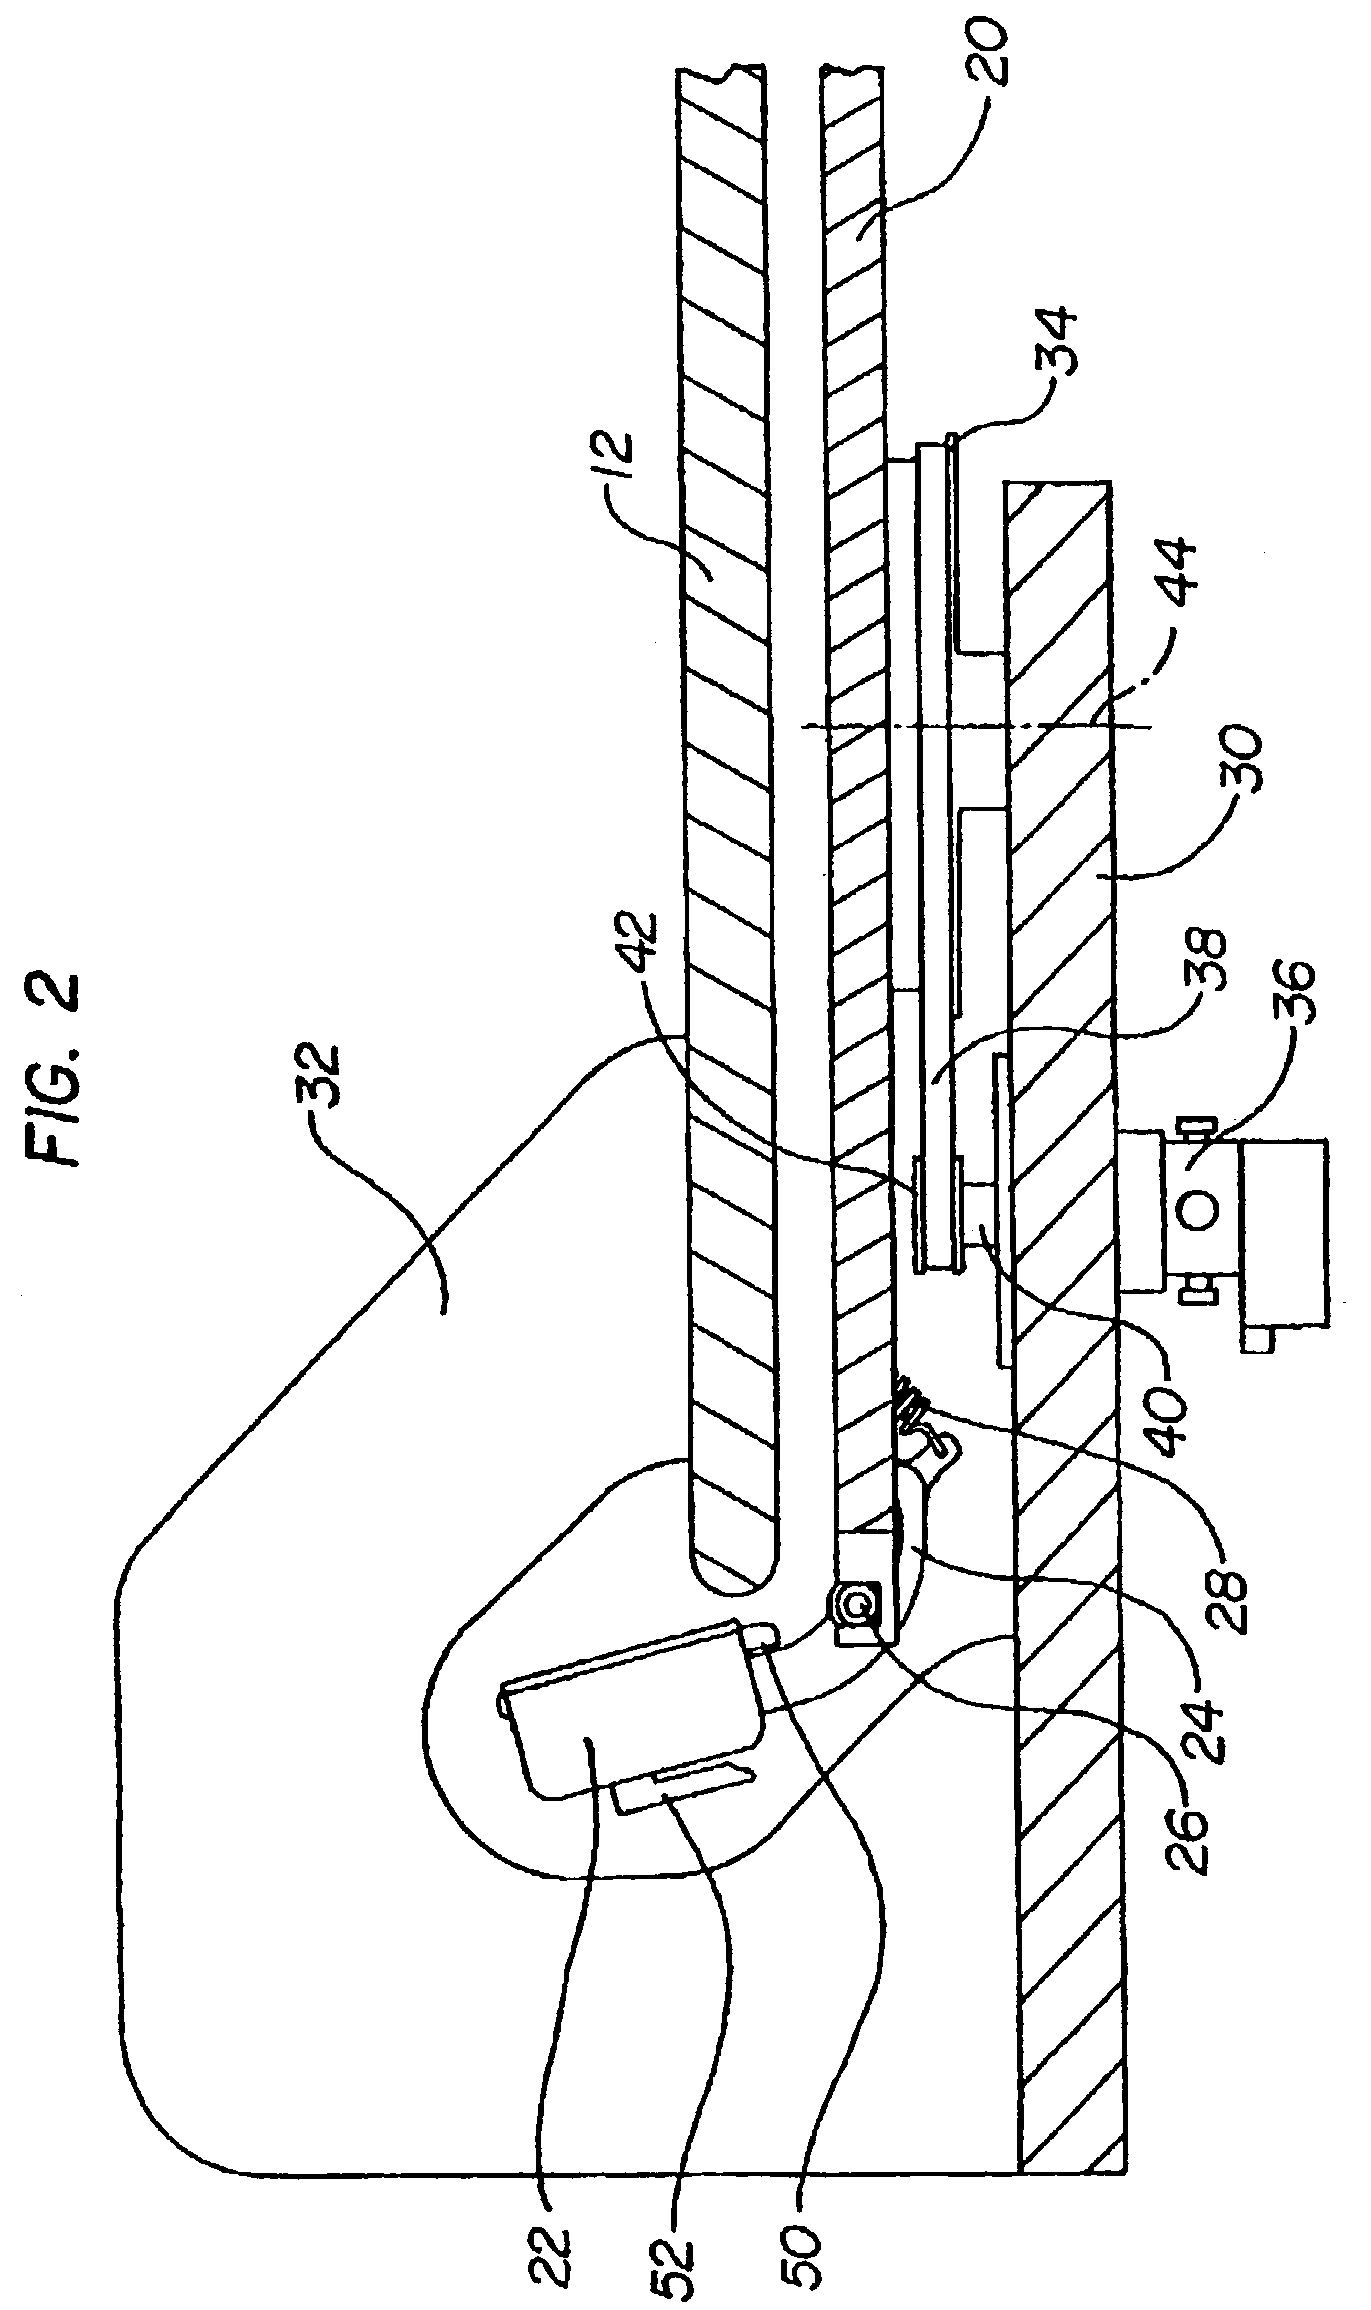 Apparatus and method for upper and lower beak treatment